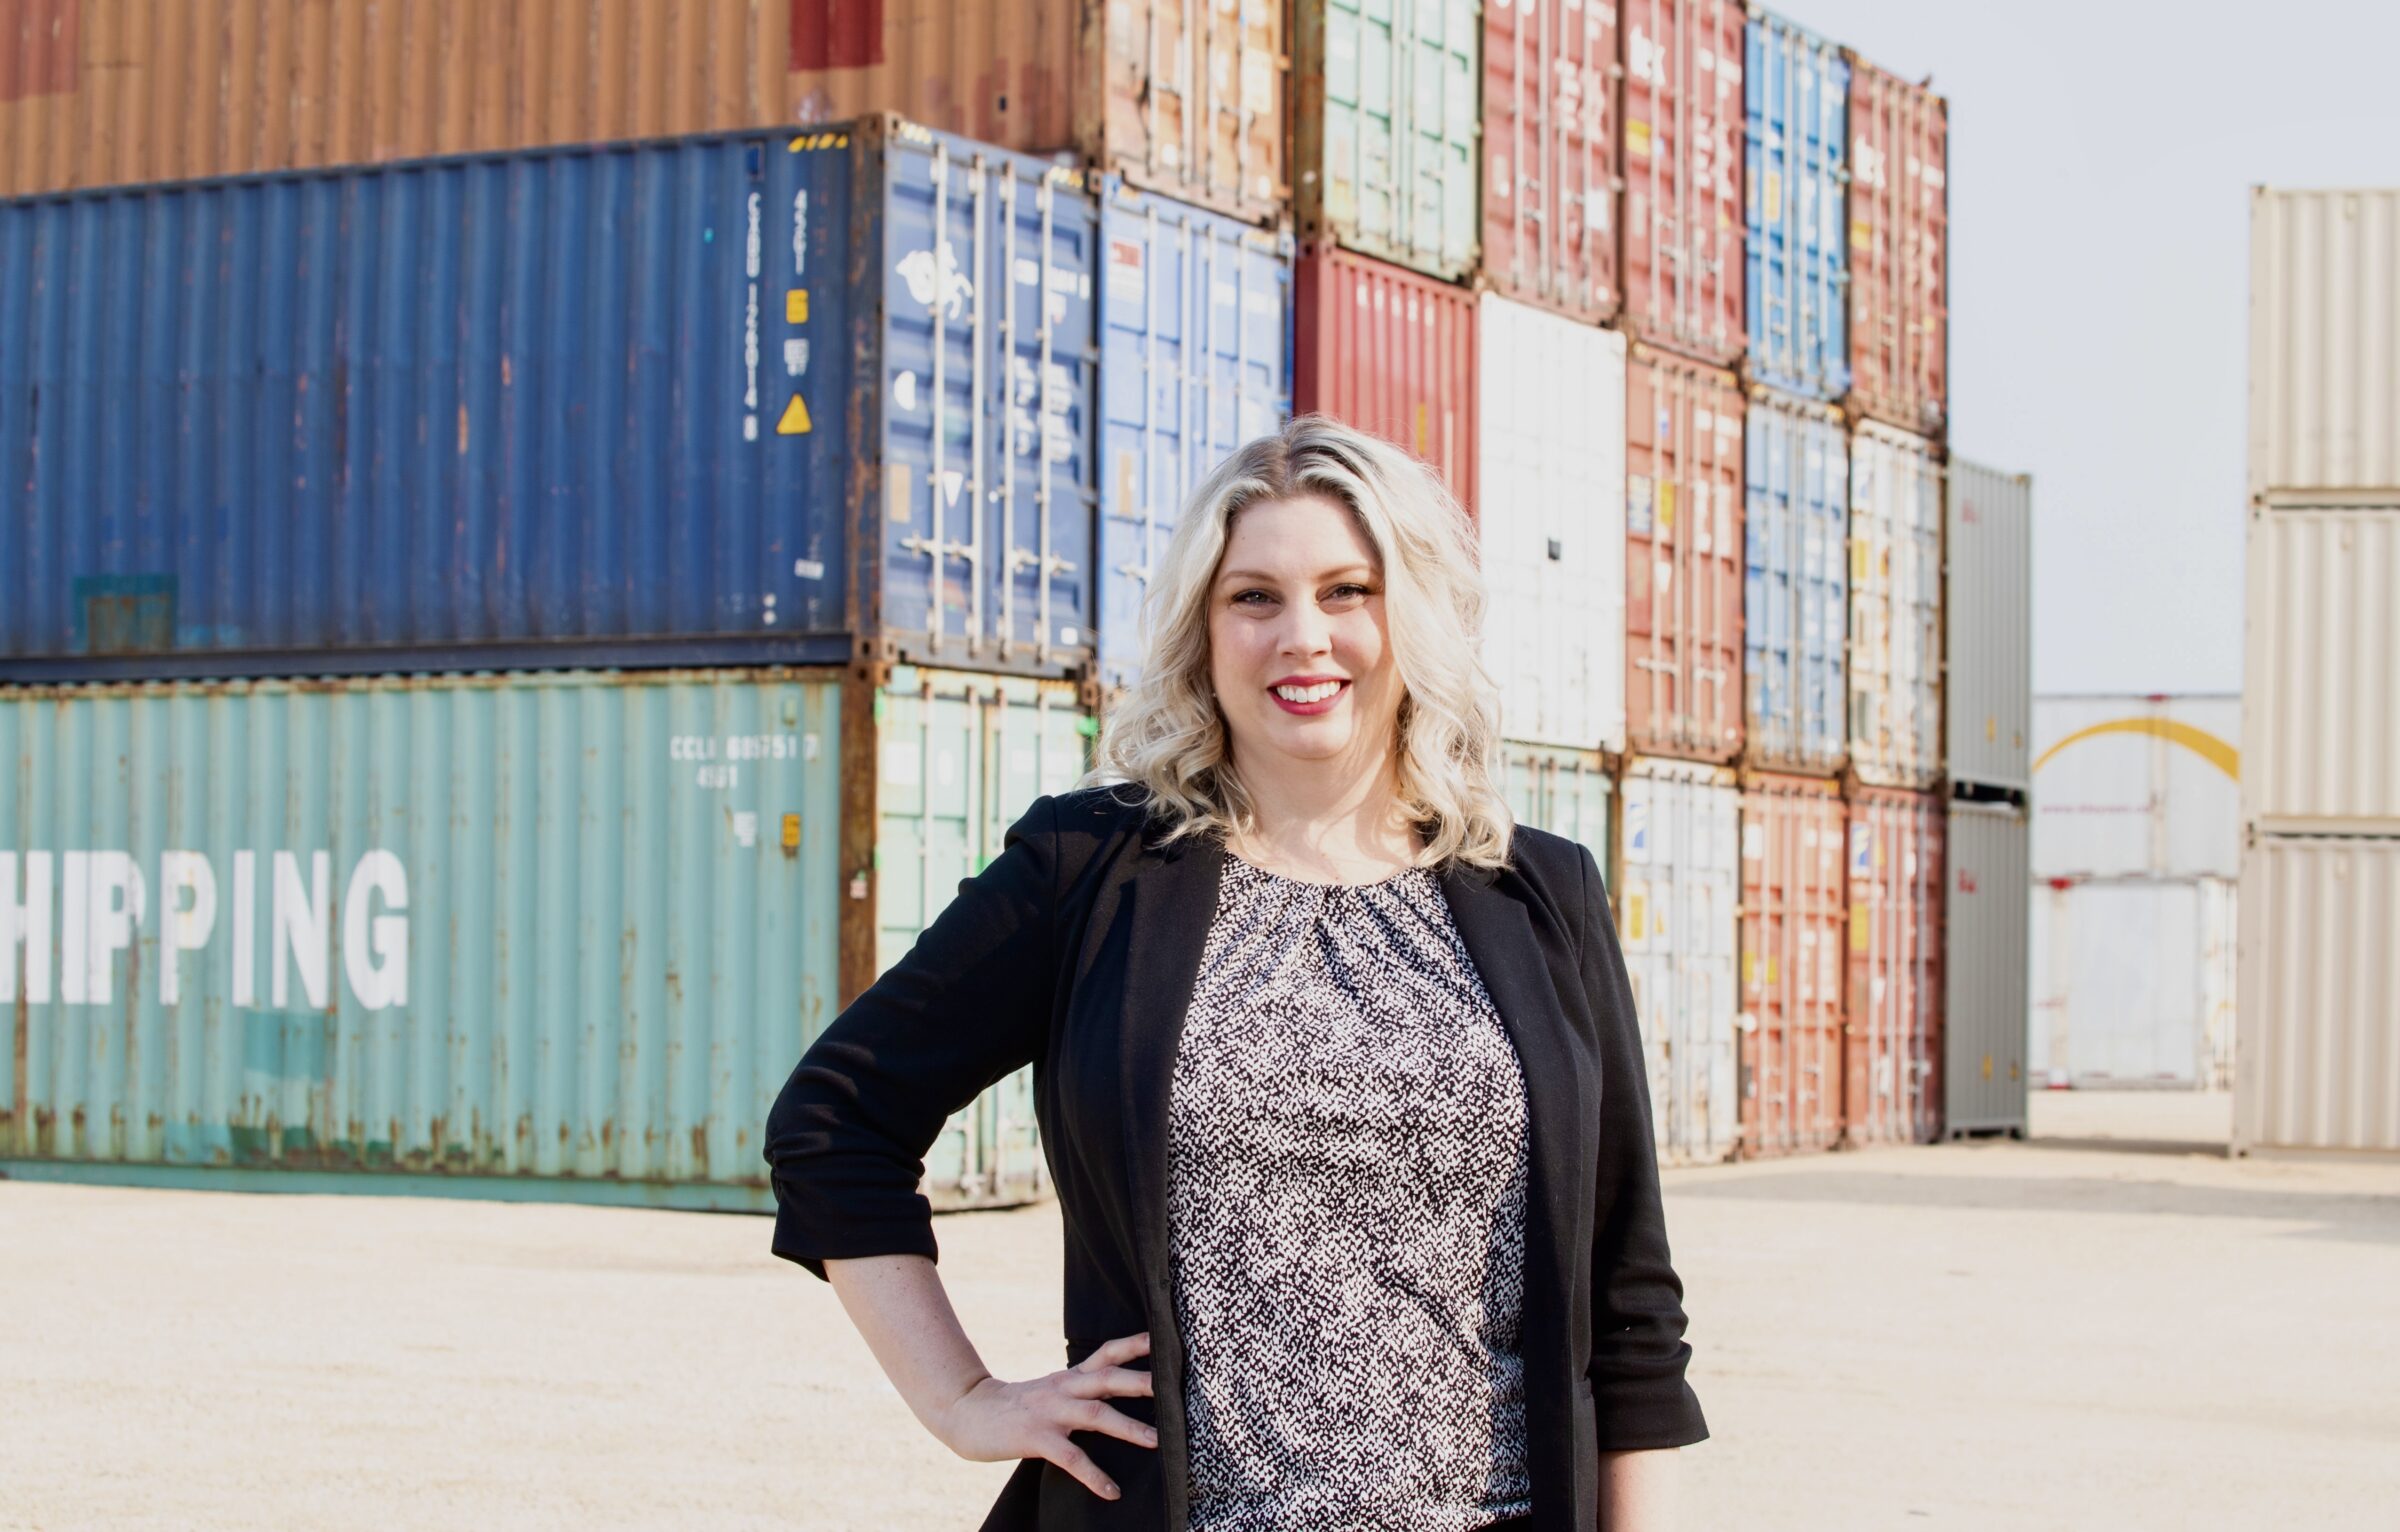 Carly Edmundson, a woman with blonde hair is standing in front of shipping containers.